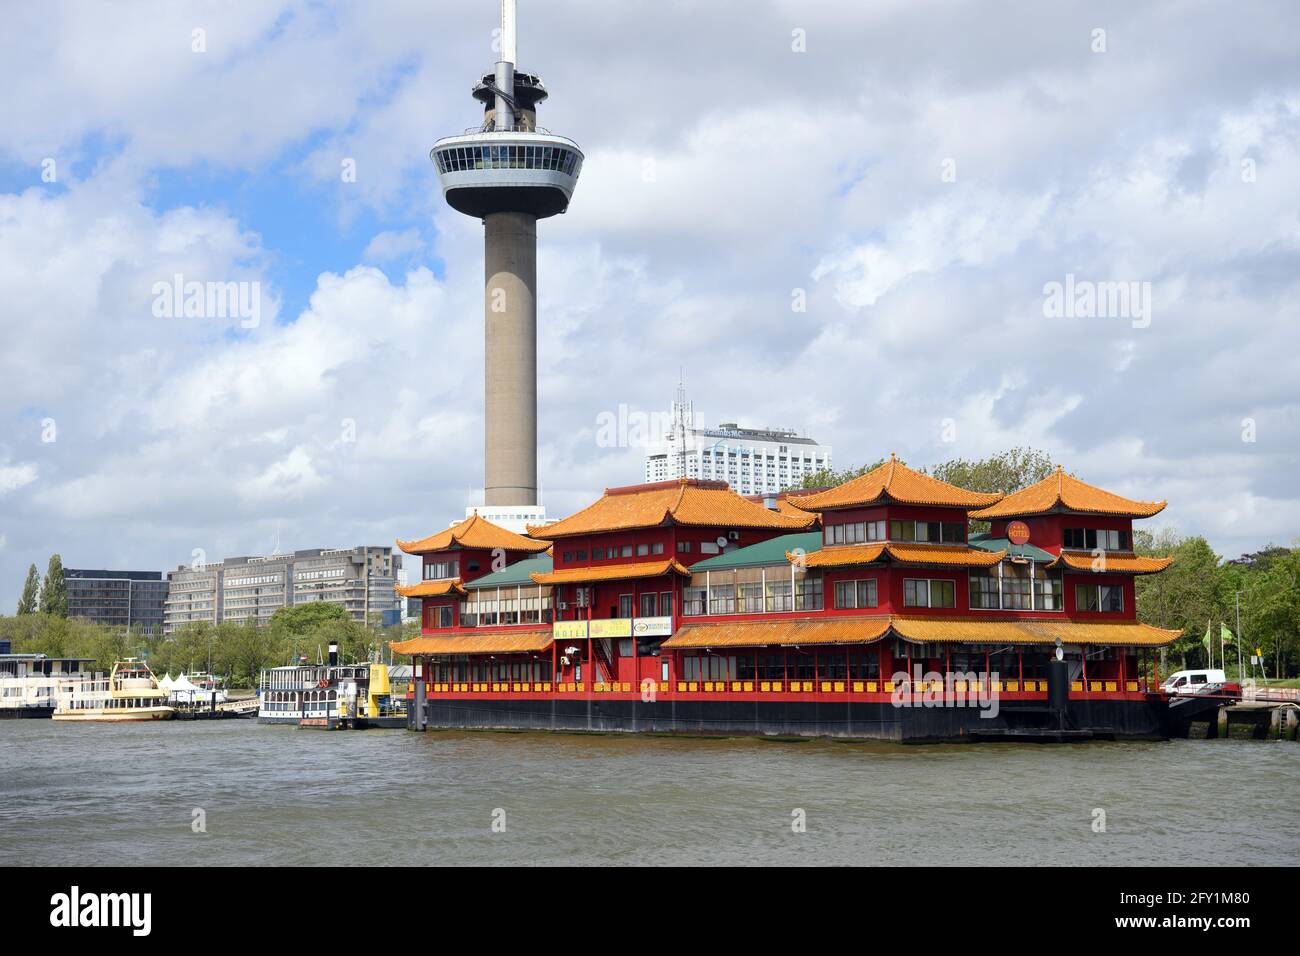 21 May 2021, Netherlands, Rotterdam: The Euromast observation tower, designed by architect Huig Maaskant, is located behind the Amazing Oriental Rotterdam Parkhaven. The tower was opened in the 1960s for the garden exhibition Floriade. The Chinese-style building houses restaurants, a hotel and a supermarket. Photo: Soeren Stache/dpa-Zentralbild/dpa Stock Photo